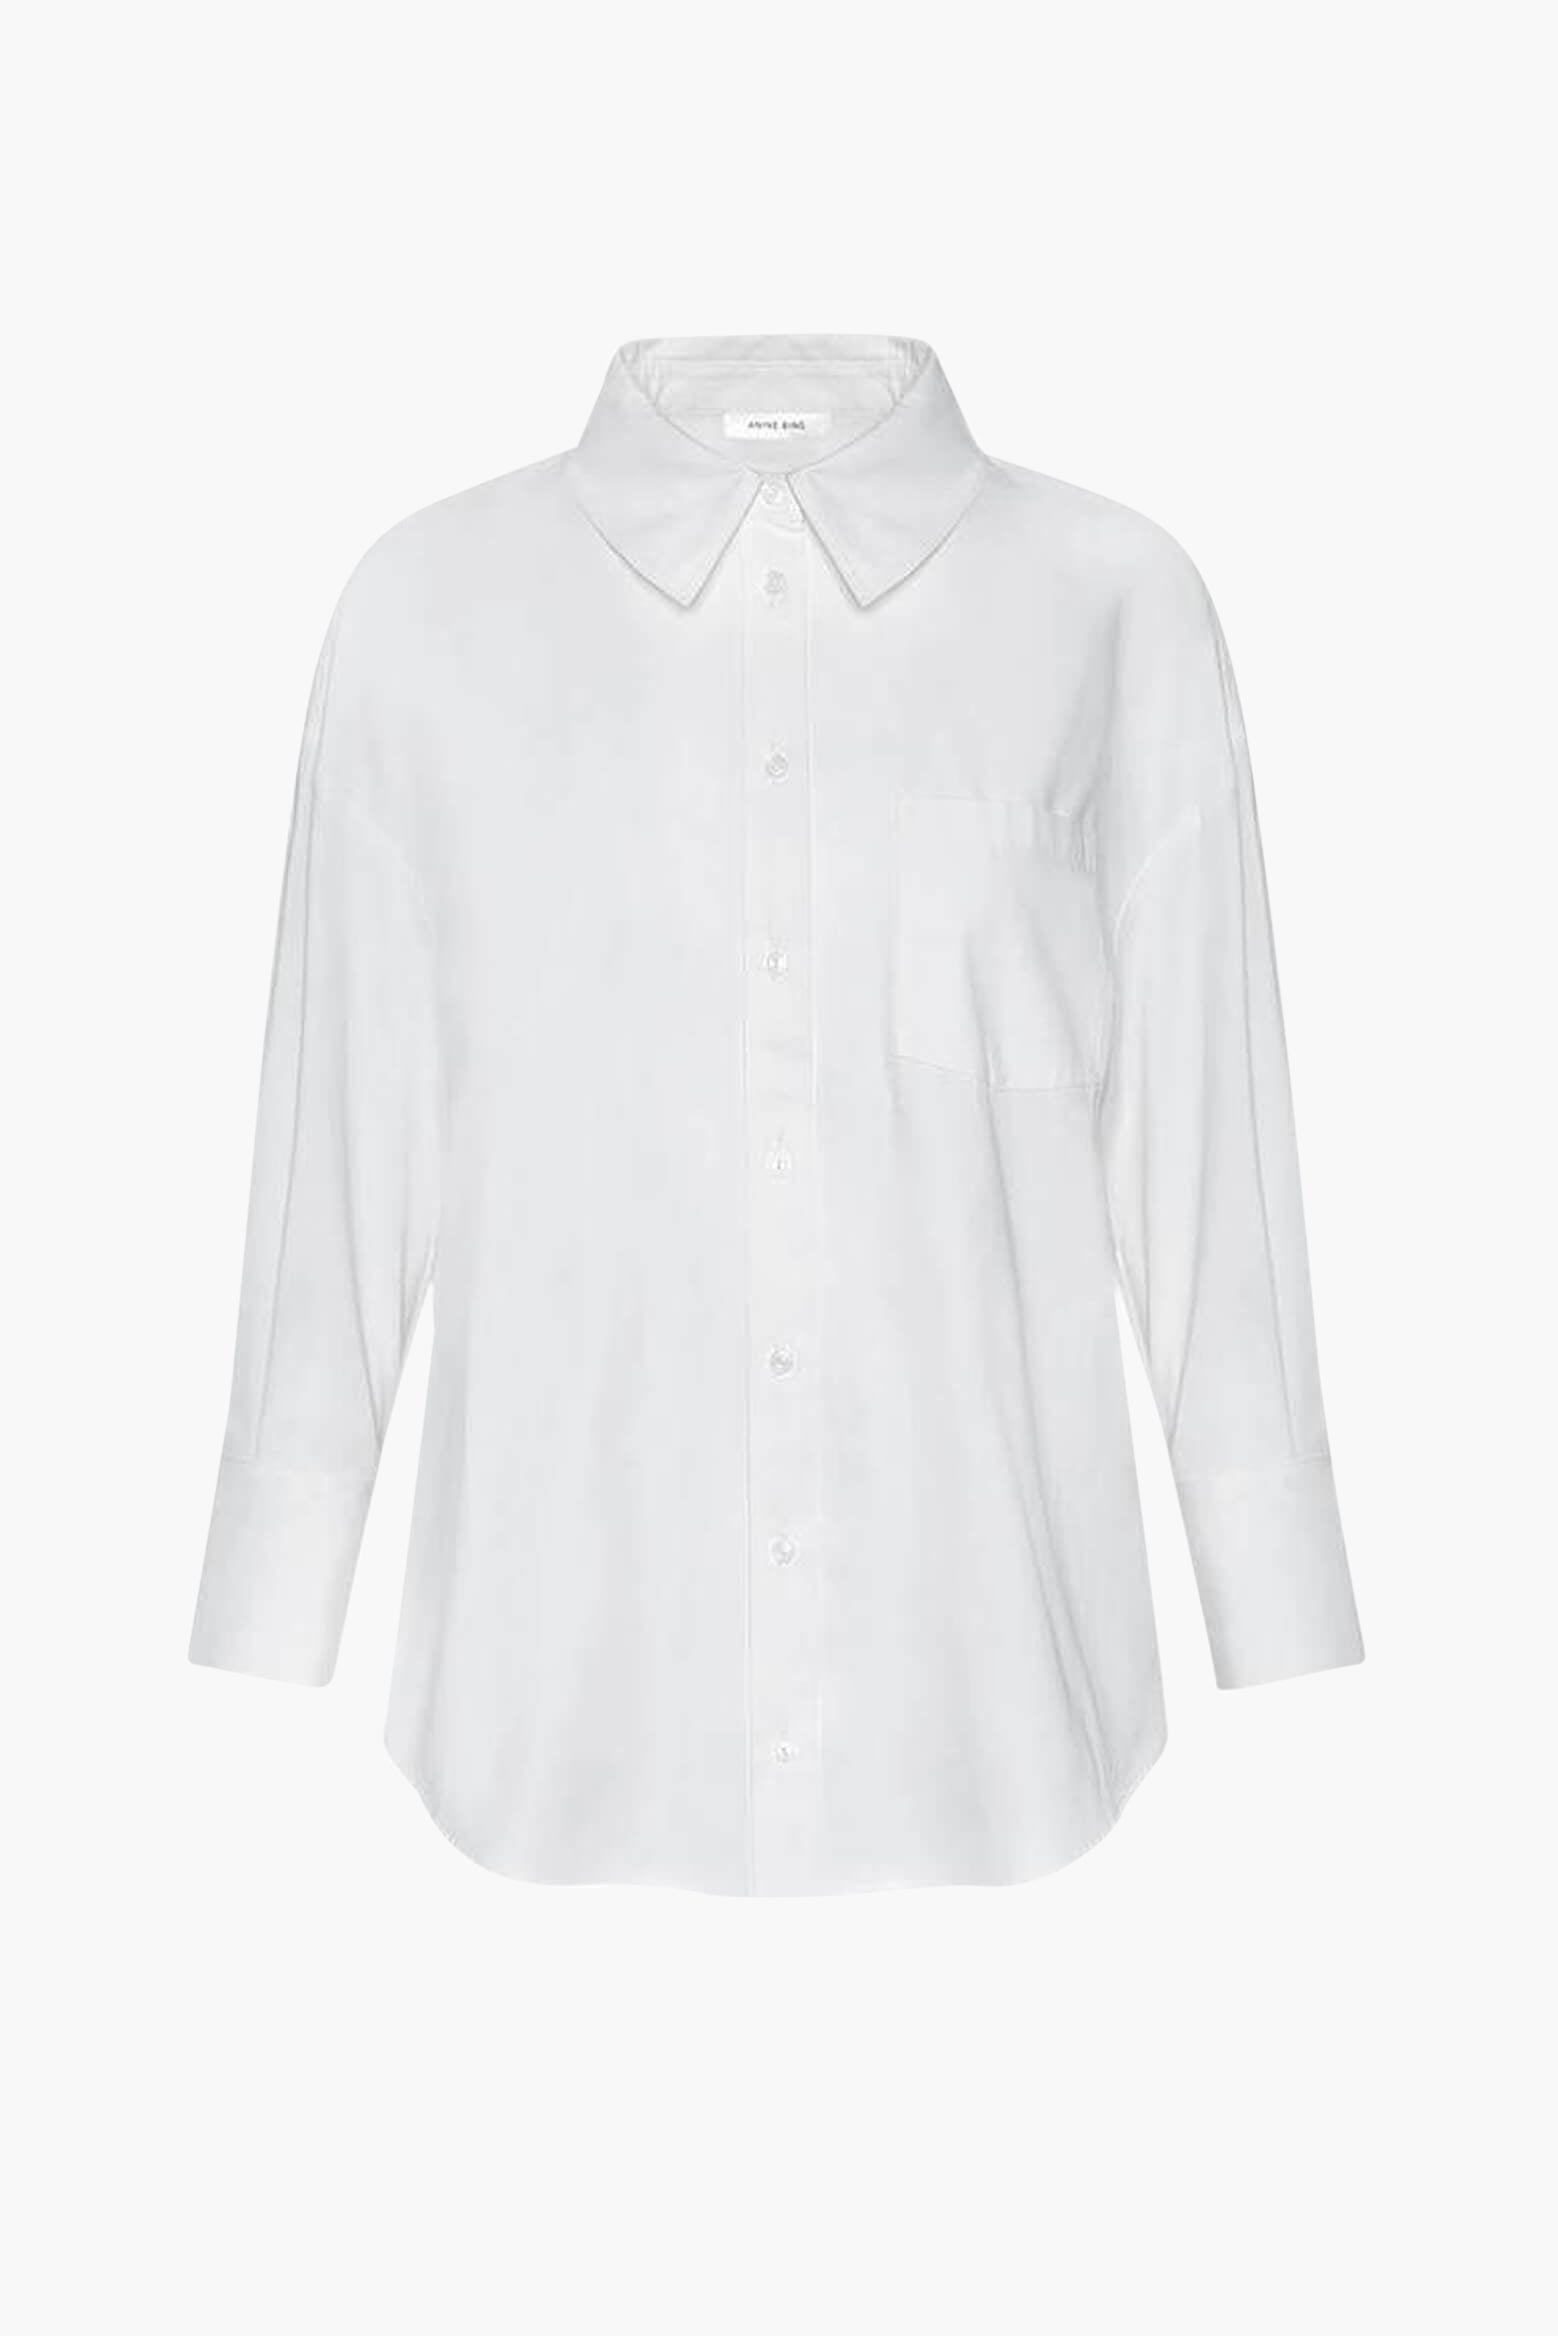 Anine Bing | Mika Shirt in White | TNT The New Trend